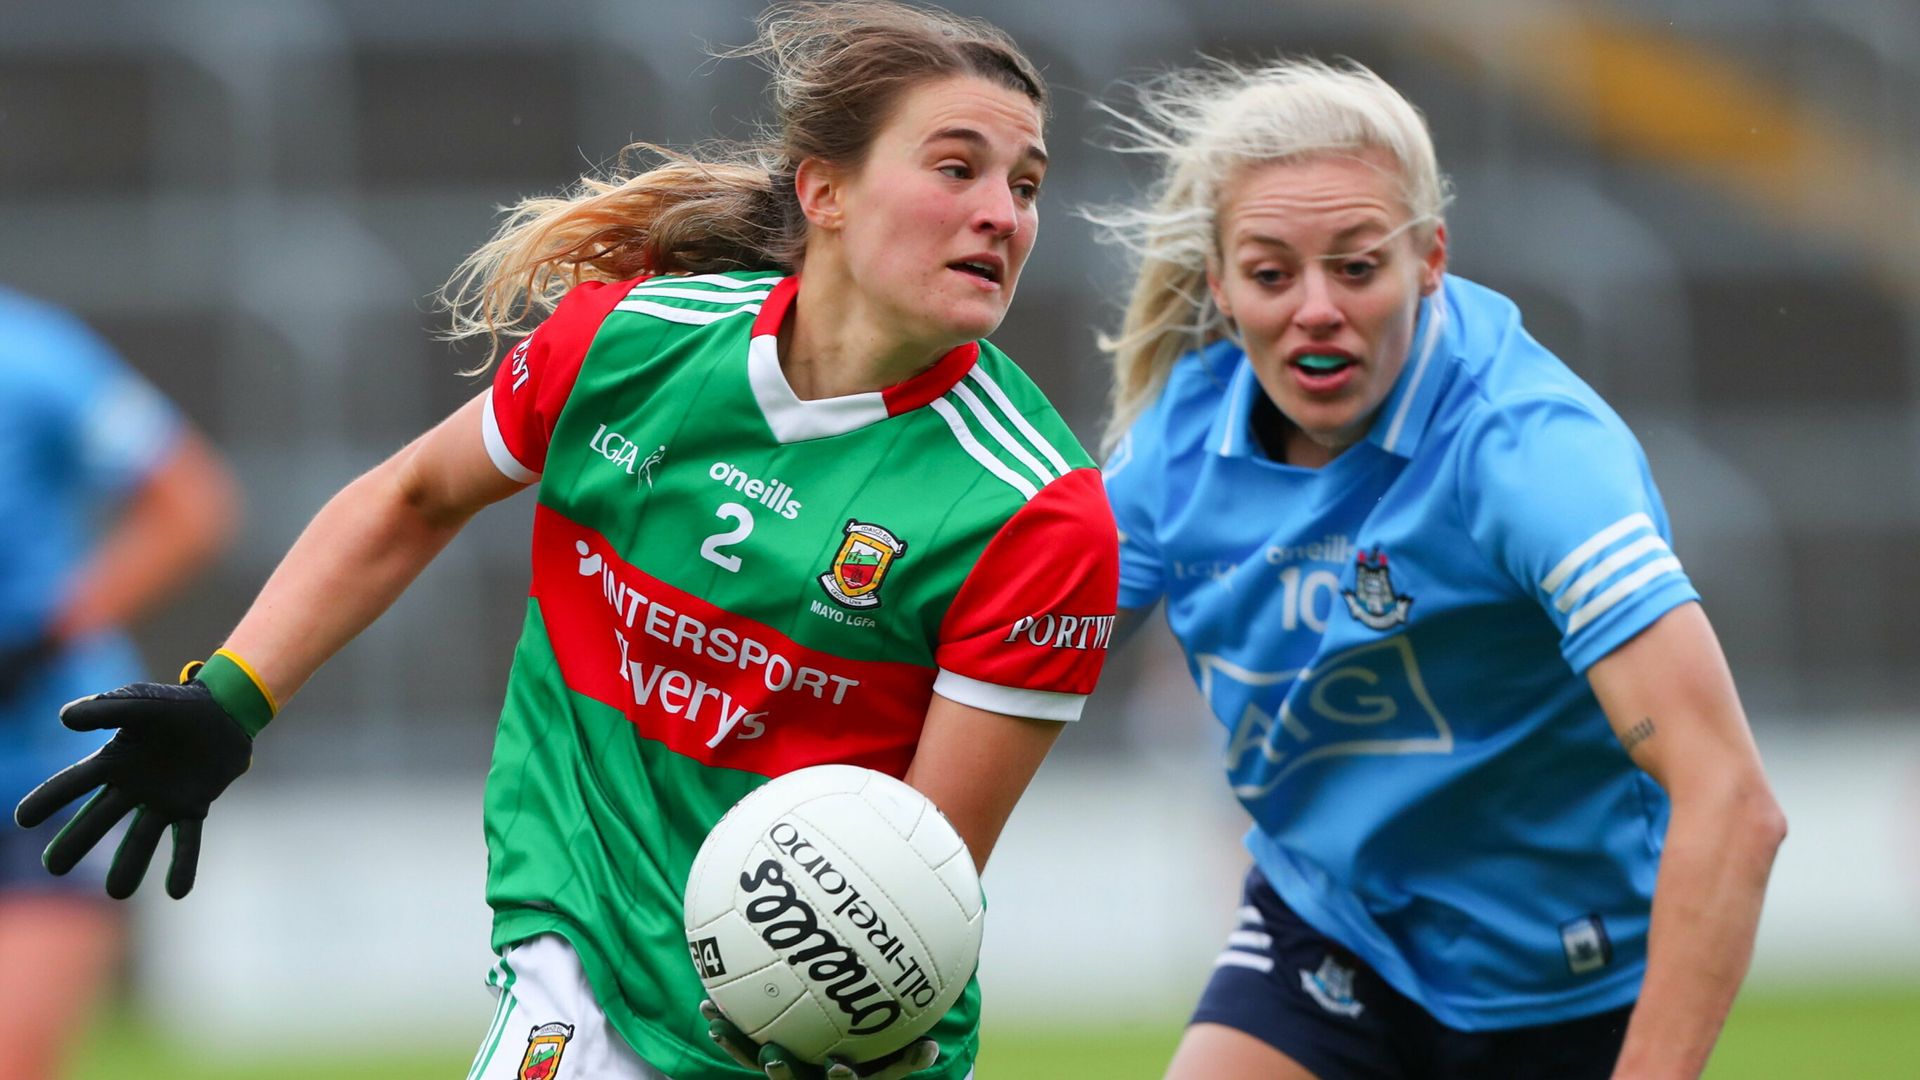 Football secondary to family ties for Mayo star Caldwell